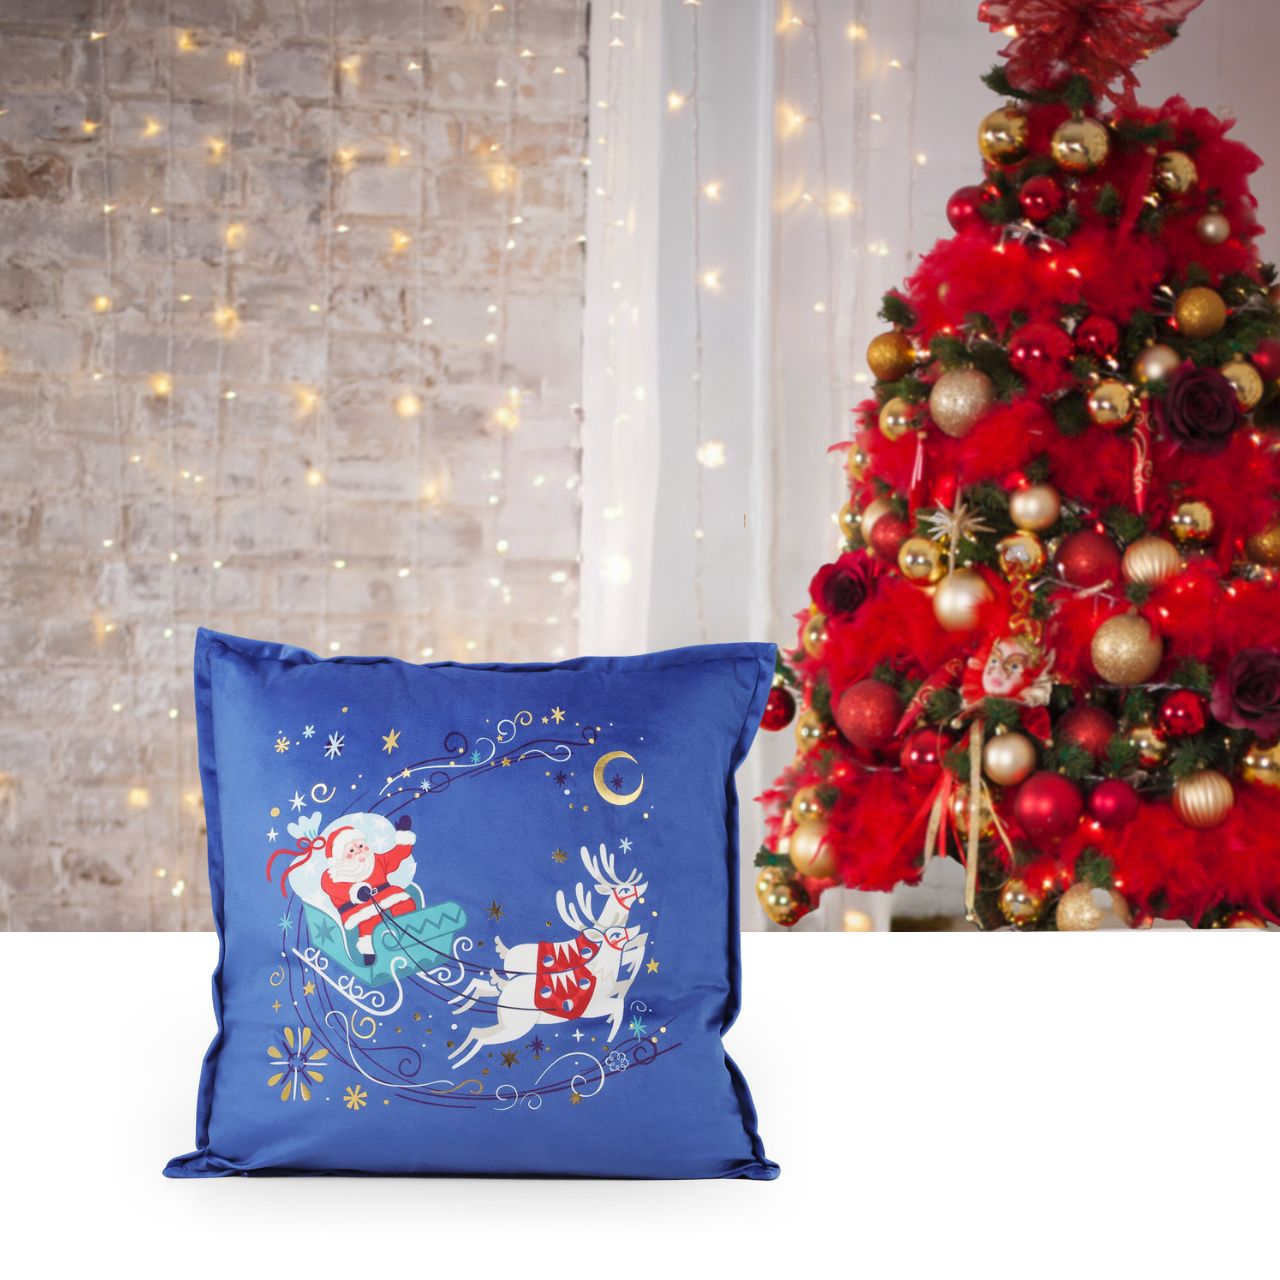 Christmas Cushion - Santa on Sleigh by Tipperary Crystal  Gather your loved ones for a holiday celebration to remember. We just Love Christmas! The festive season, the giving of gifts, creating memories and being together with family and loved ones. Have lots of fun with our lovingly designed and created Christmas decorations, each one has a magic sparkle of elf dust!